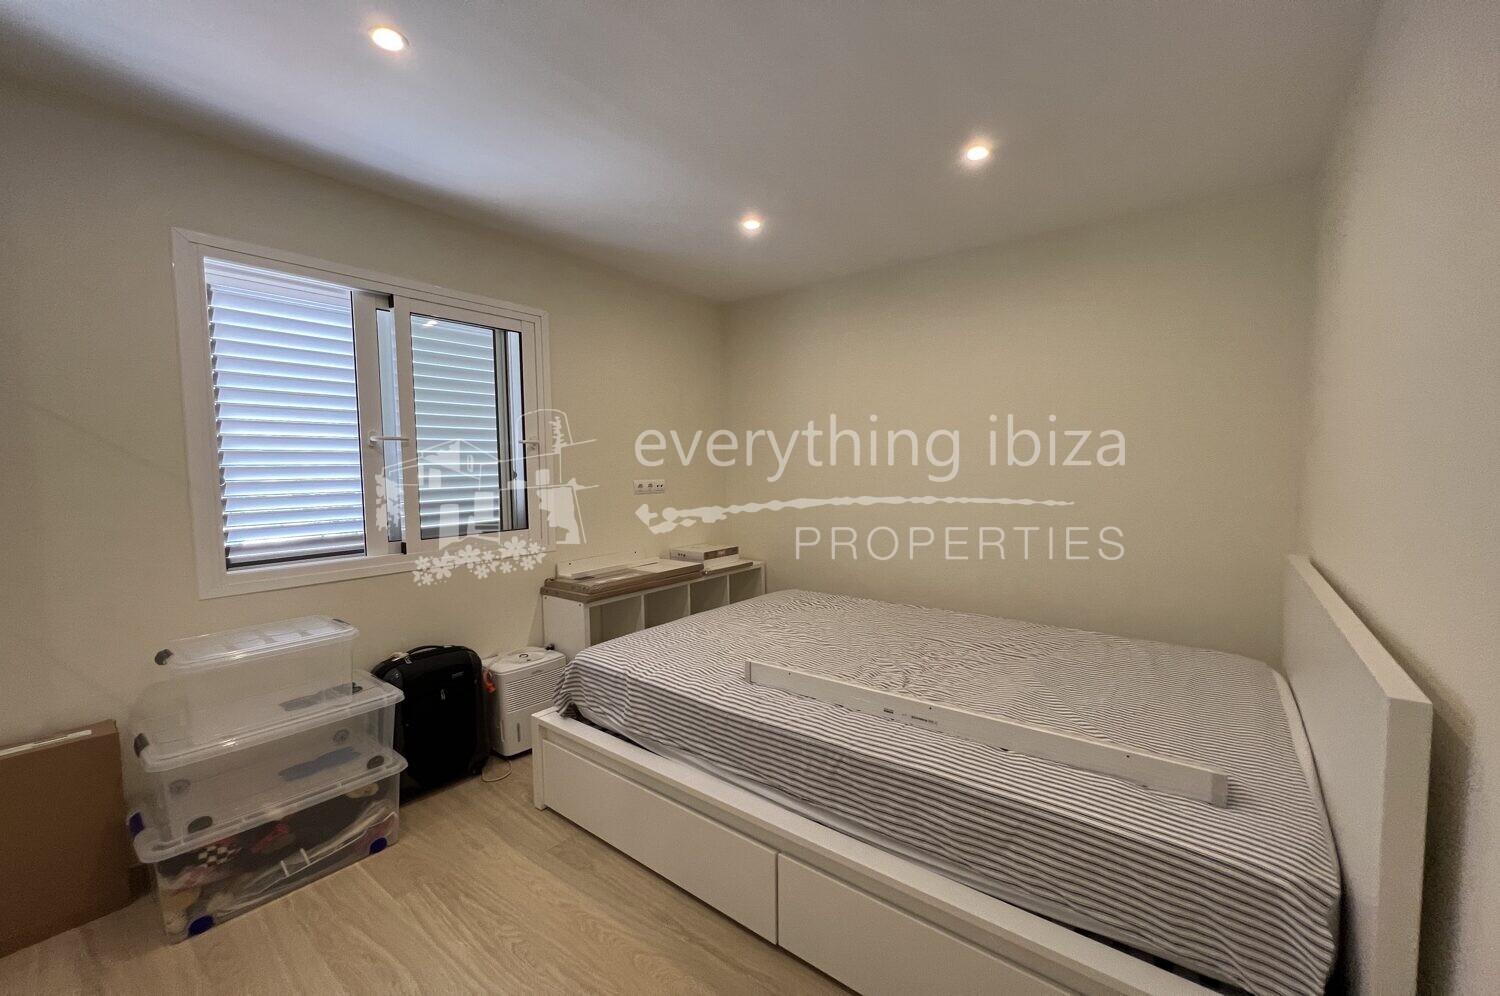 Charming Renovated Townhouse in Peaceful Surroundings, ref. 1462, for sale in Ibiza by everything ibiza Properties